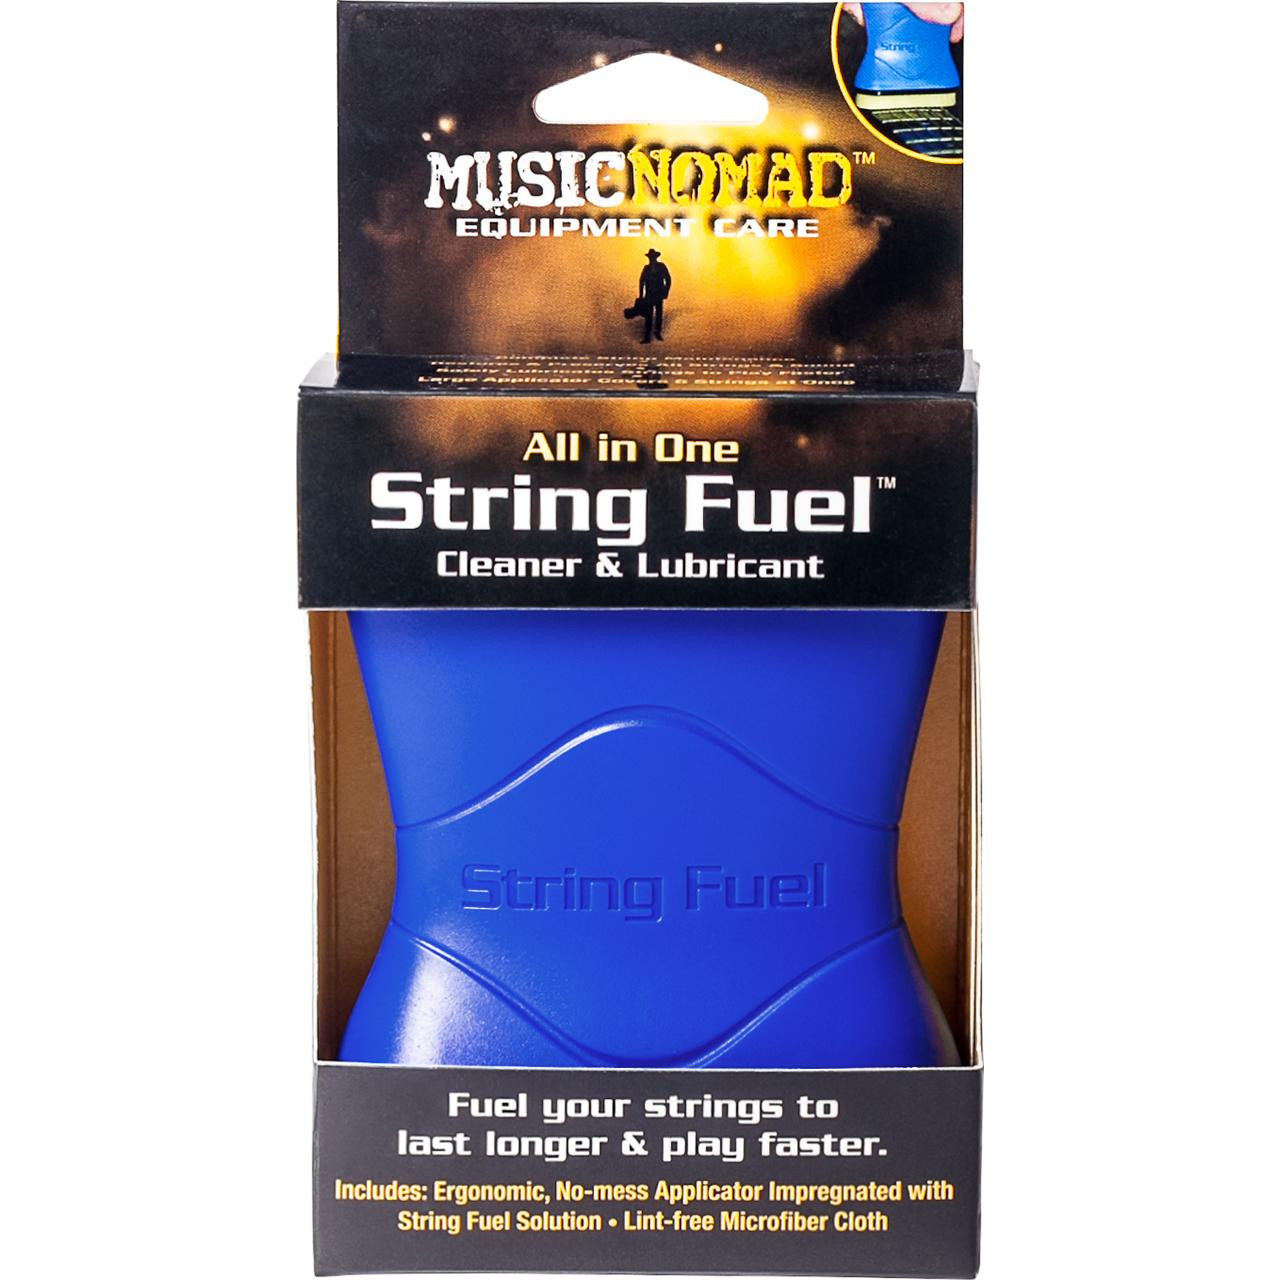 String Fuel, Cleaner, & Lubricant